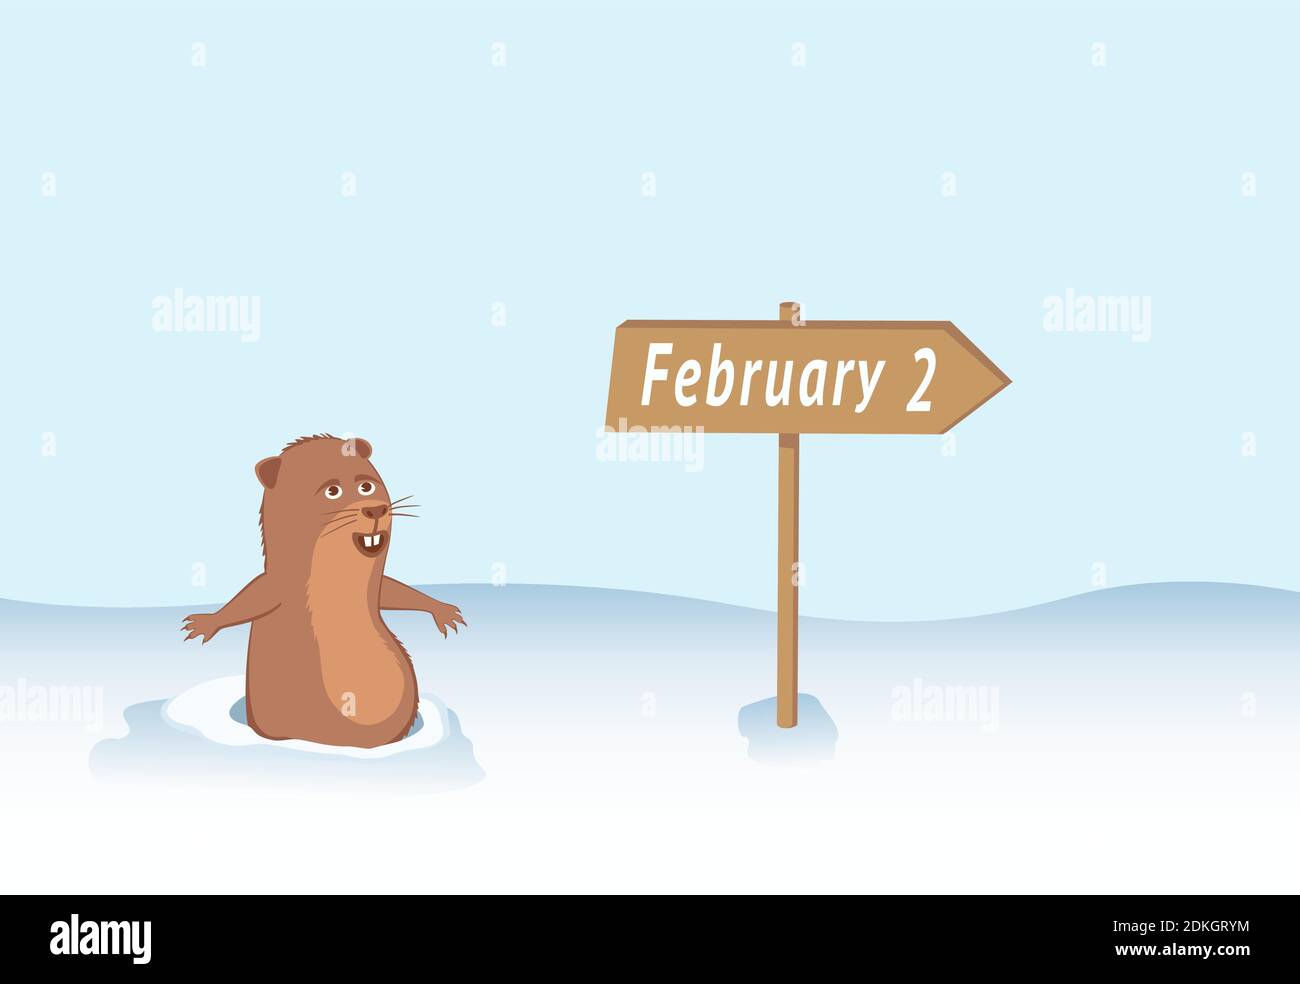 Groundhog climbed out of the hole for weather forecasting. Stock Vector